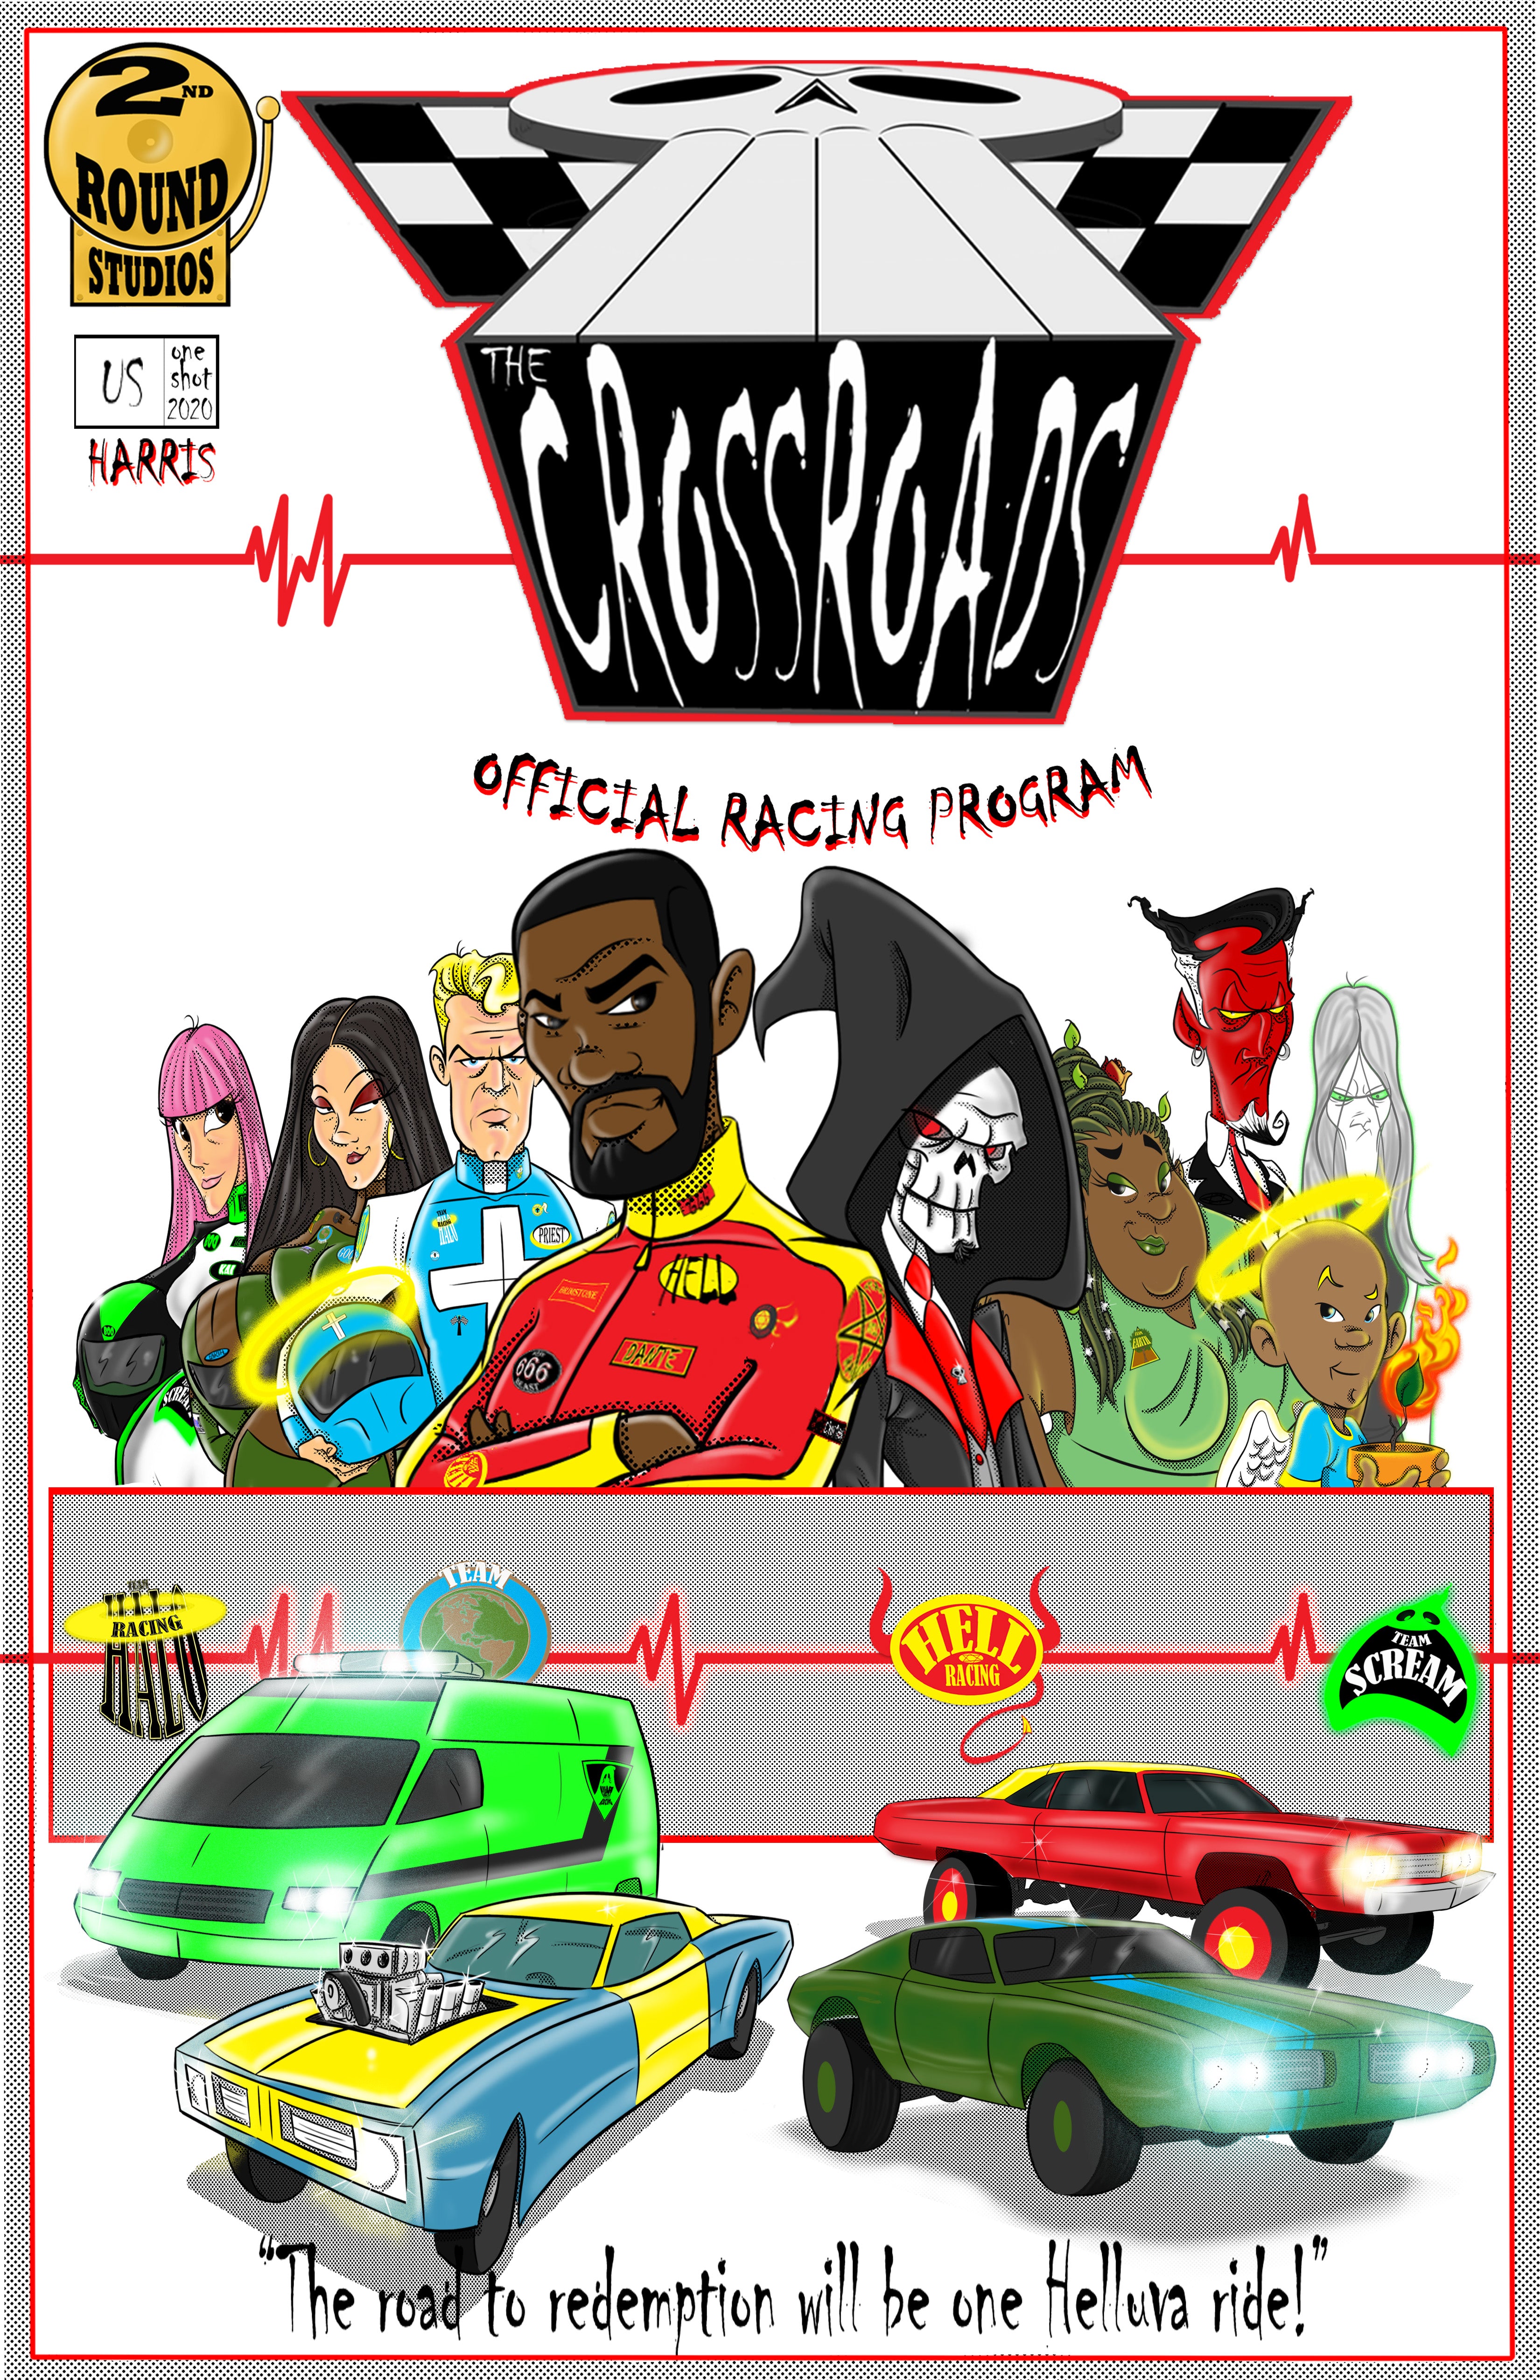 Image of comic book cover with racers and race cars